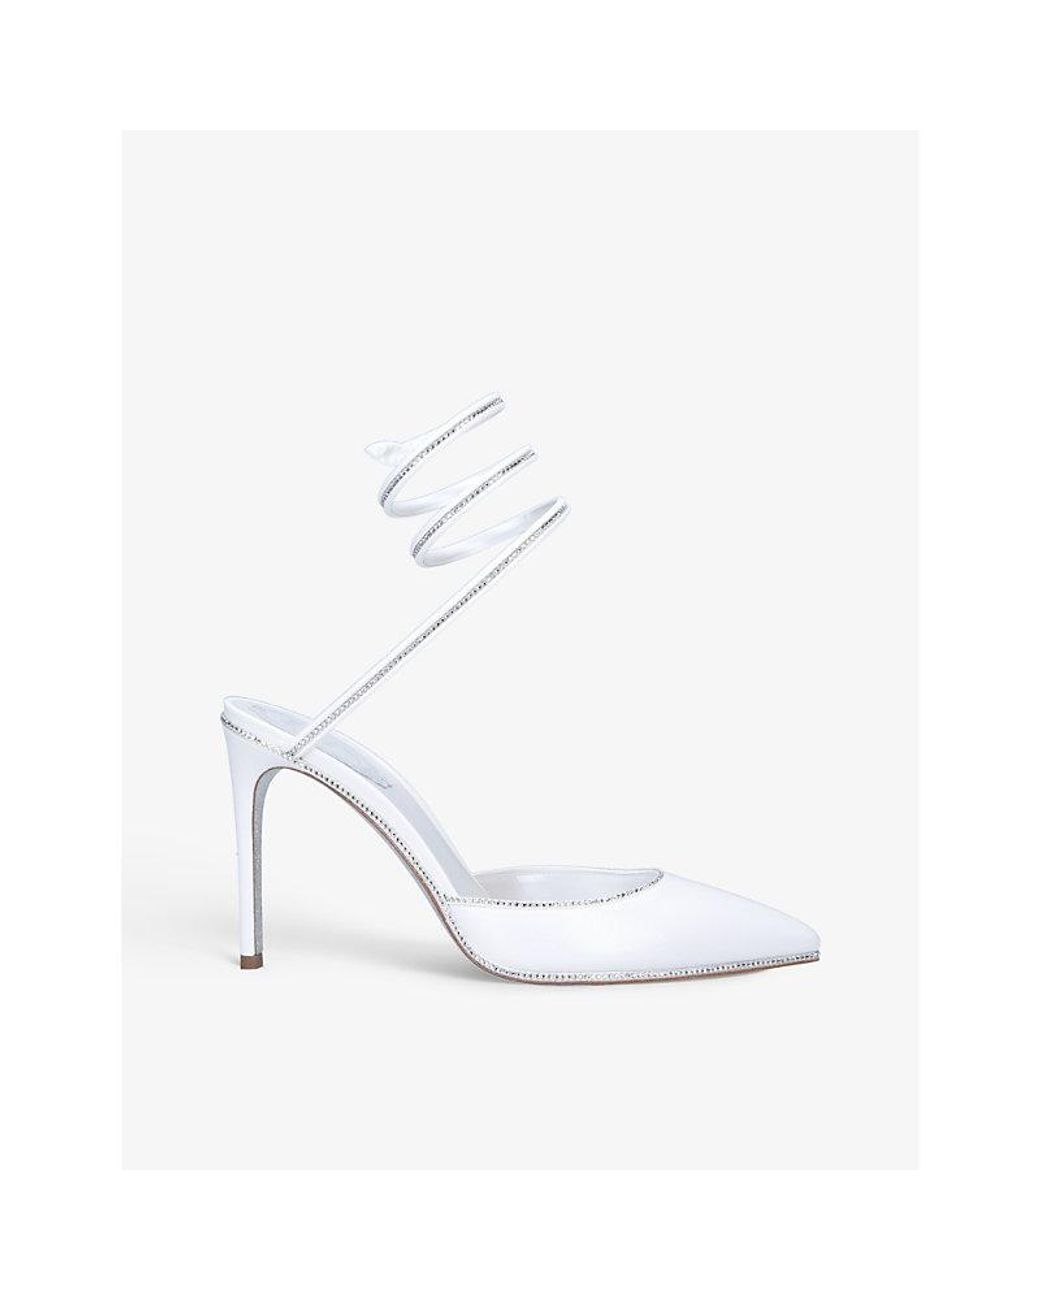 Rene Caovilla Cleo Pointed-toe Satin And Leather Heels in White | Lyst